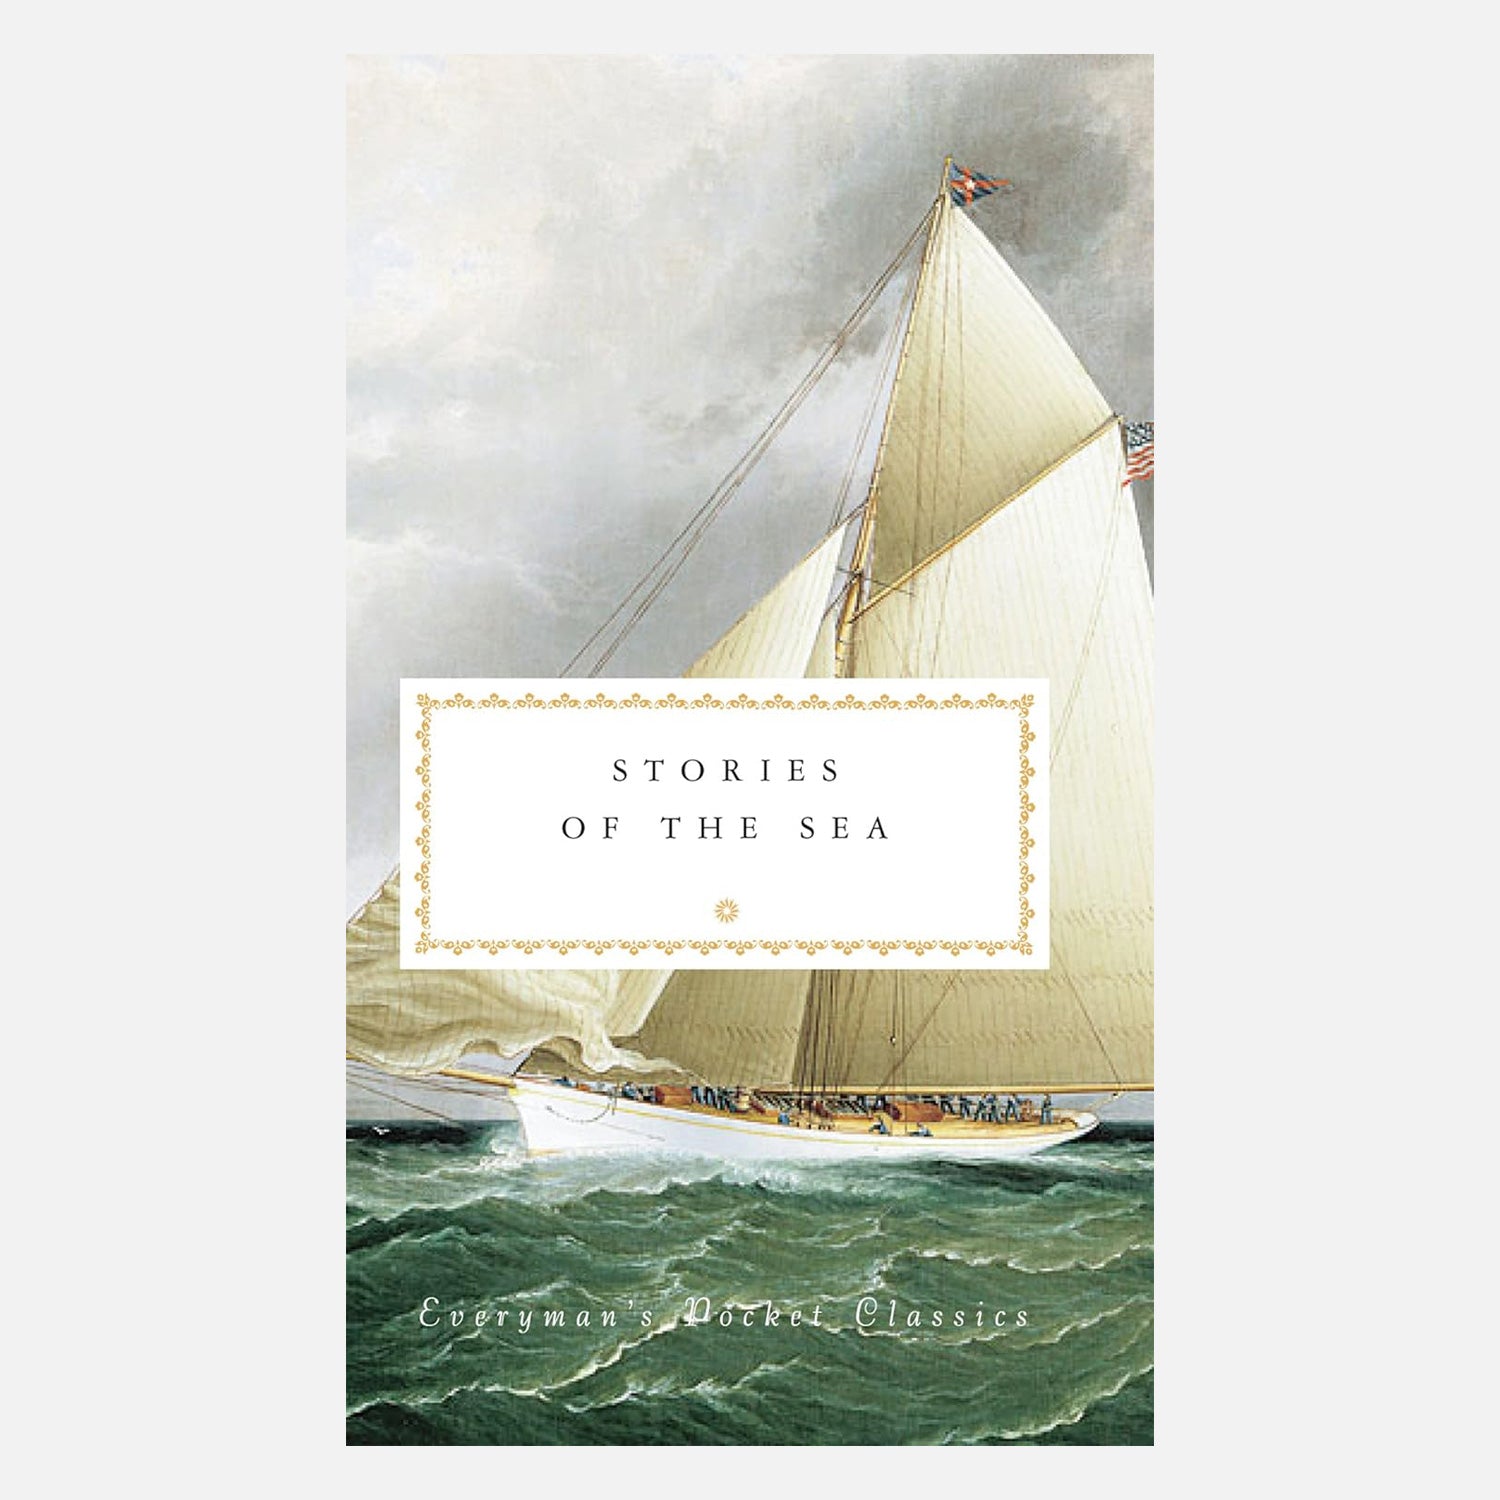 Stories of the Sea (Everyman's Library Pocket Classics). A classical painting of a sail boat on a green choppy sea.